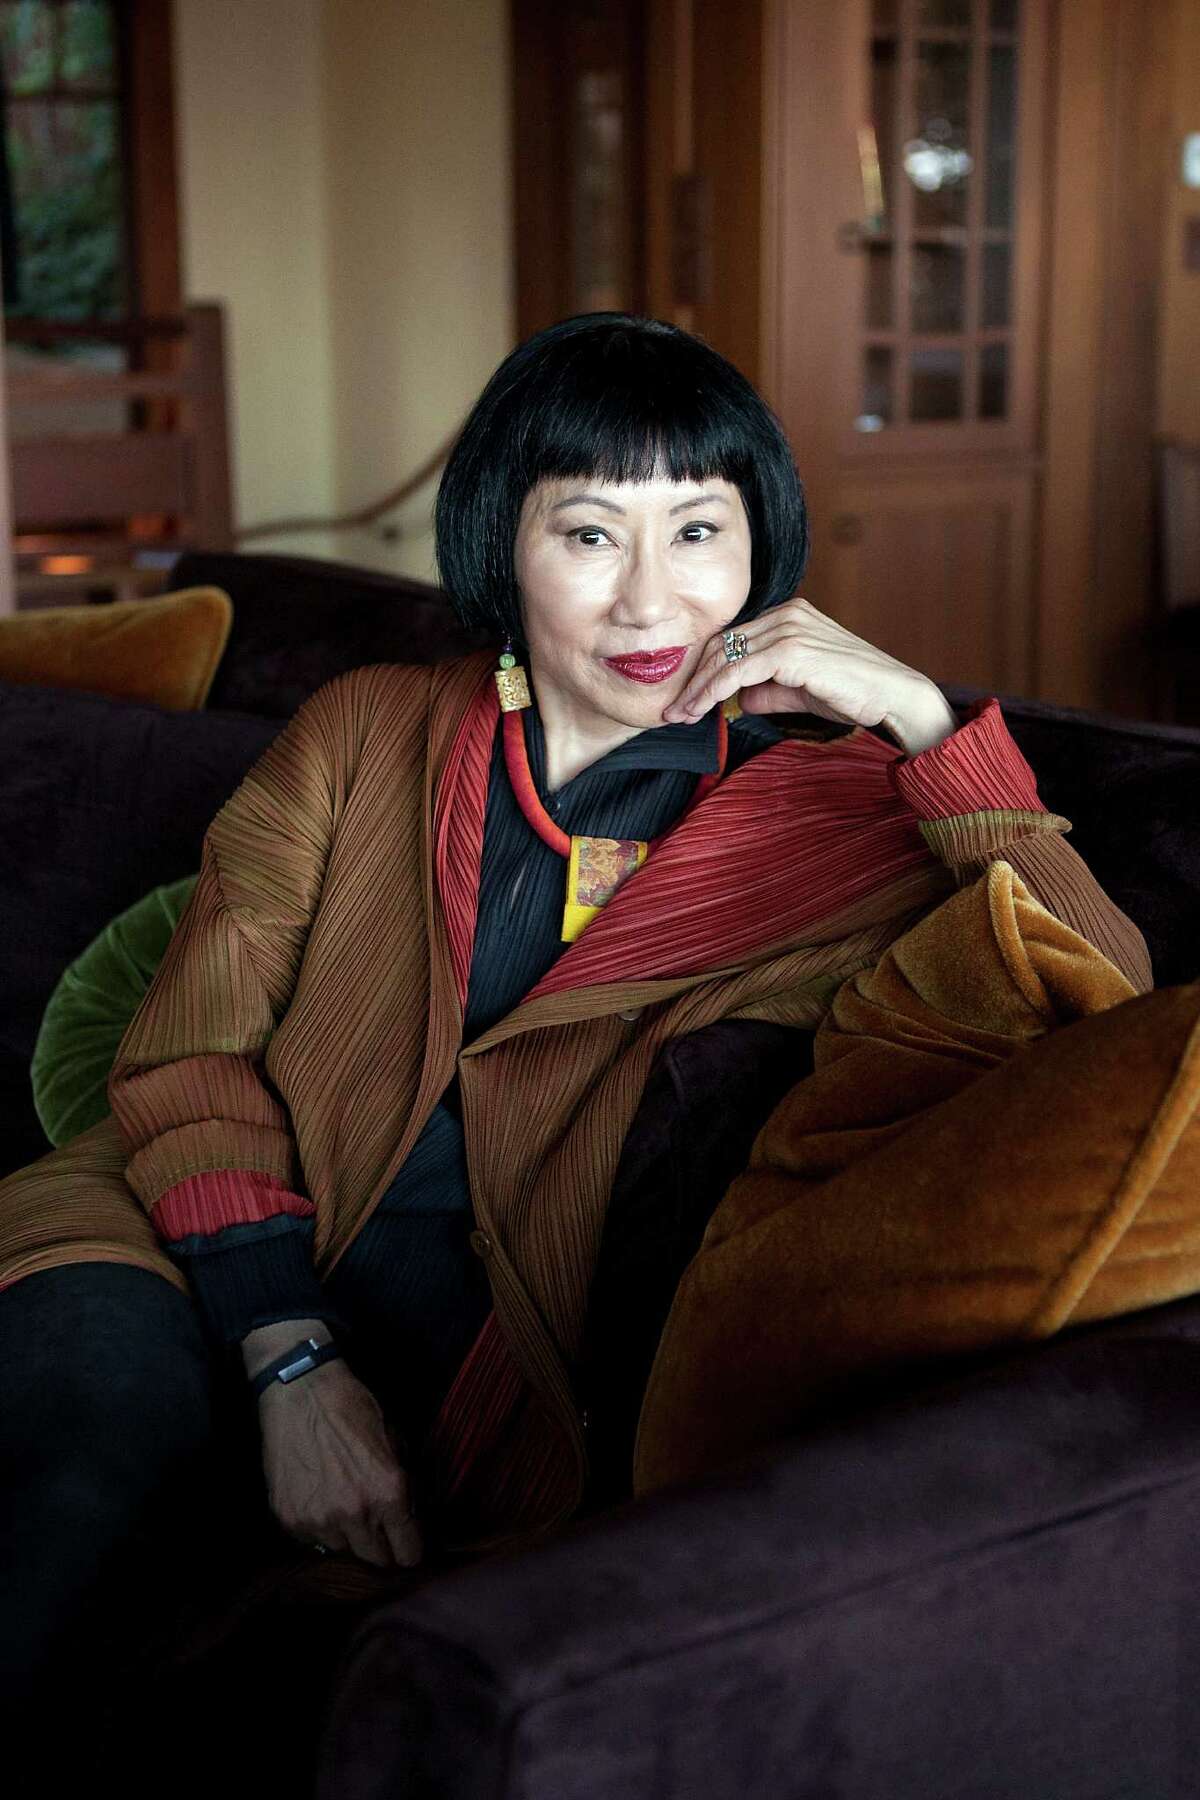 Novelist Amy Tan, photographed in her home in Sausalito, Calif., spent eight years researching and writing ﻿"The Valley of Amazement."